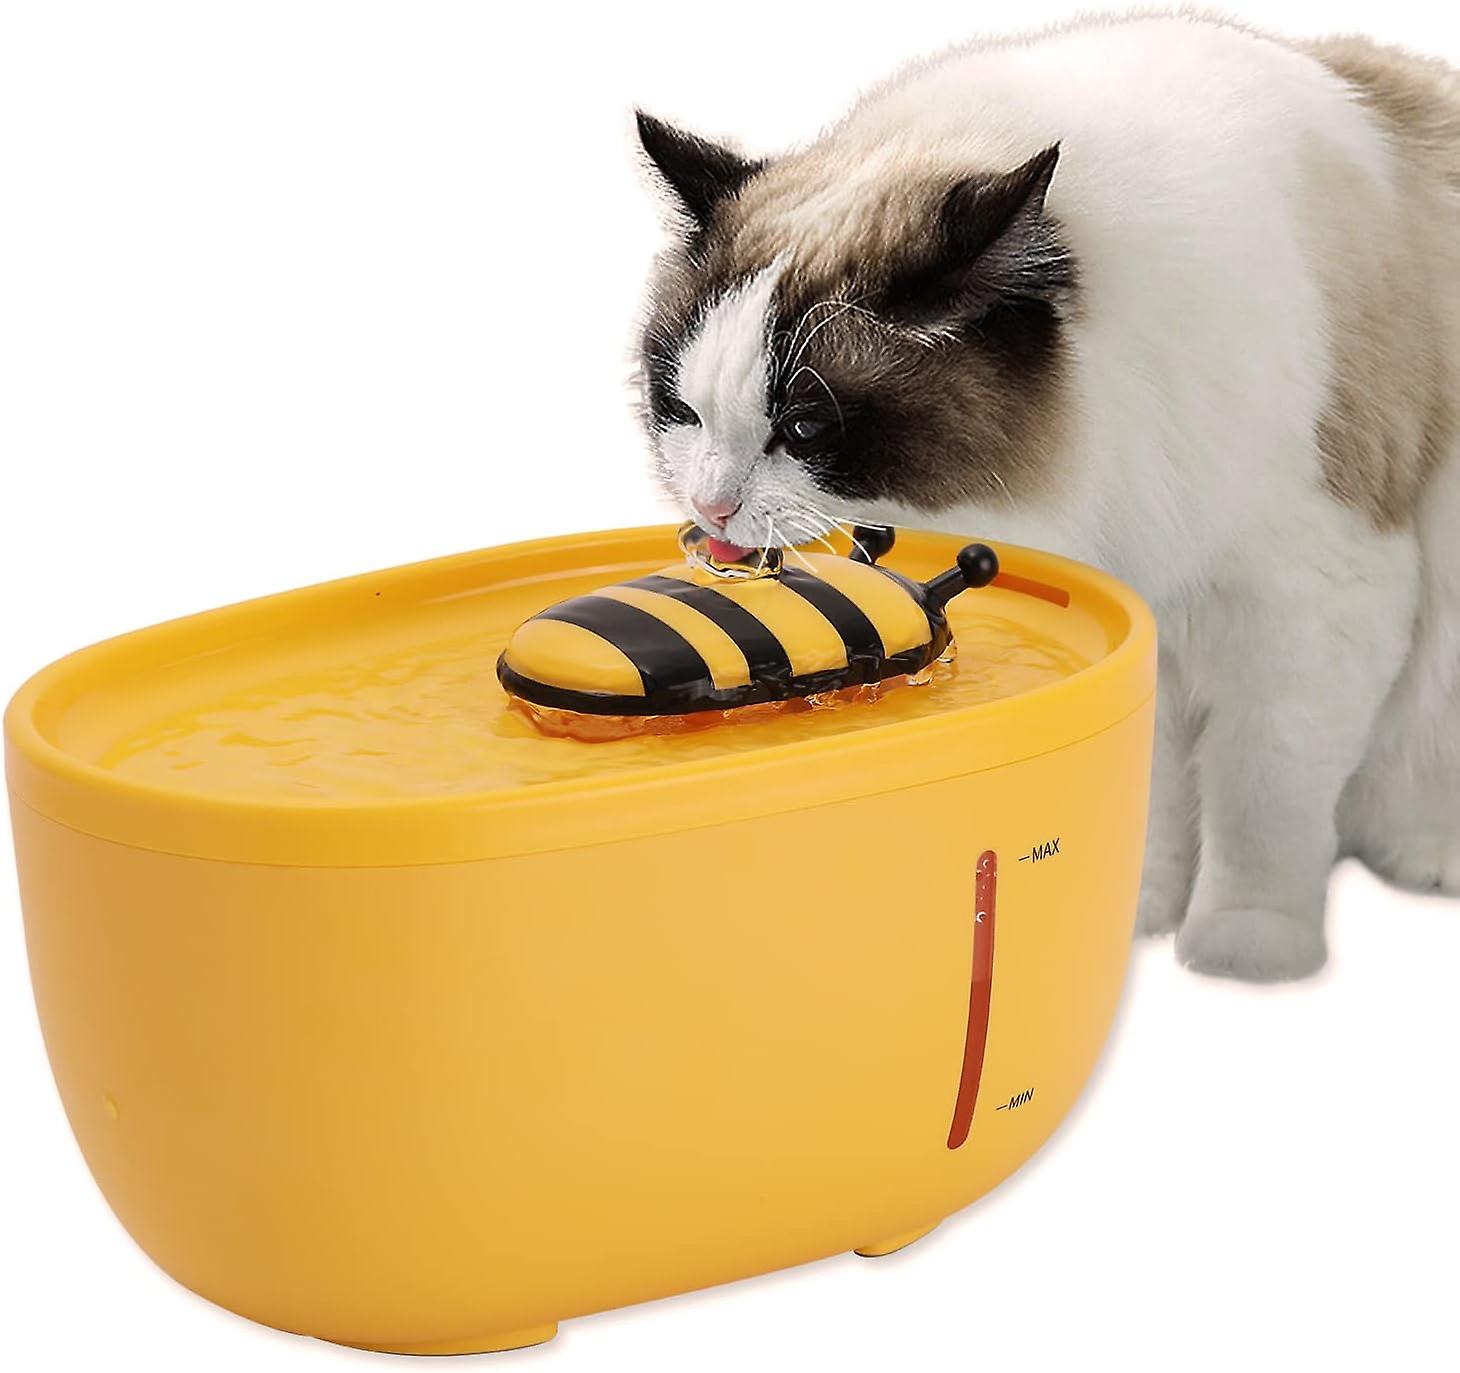 How To Make A Cat Water Fountain Quieter